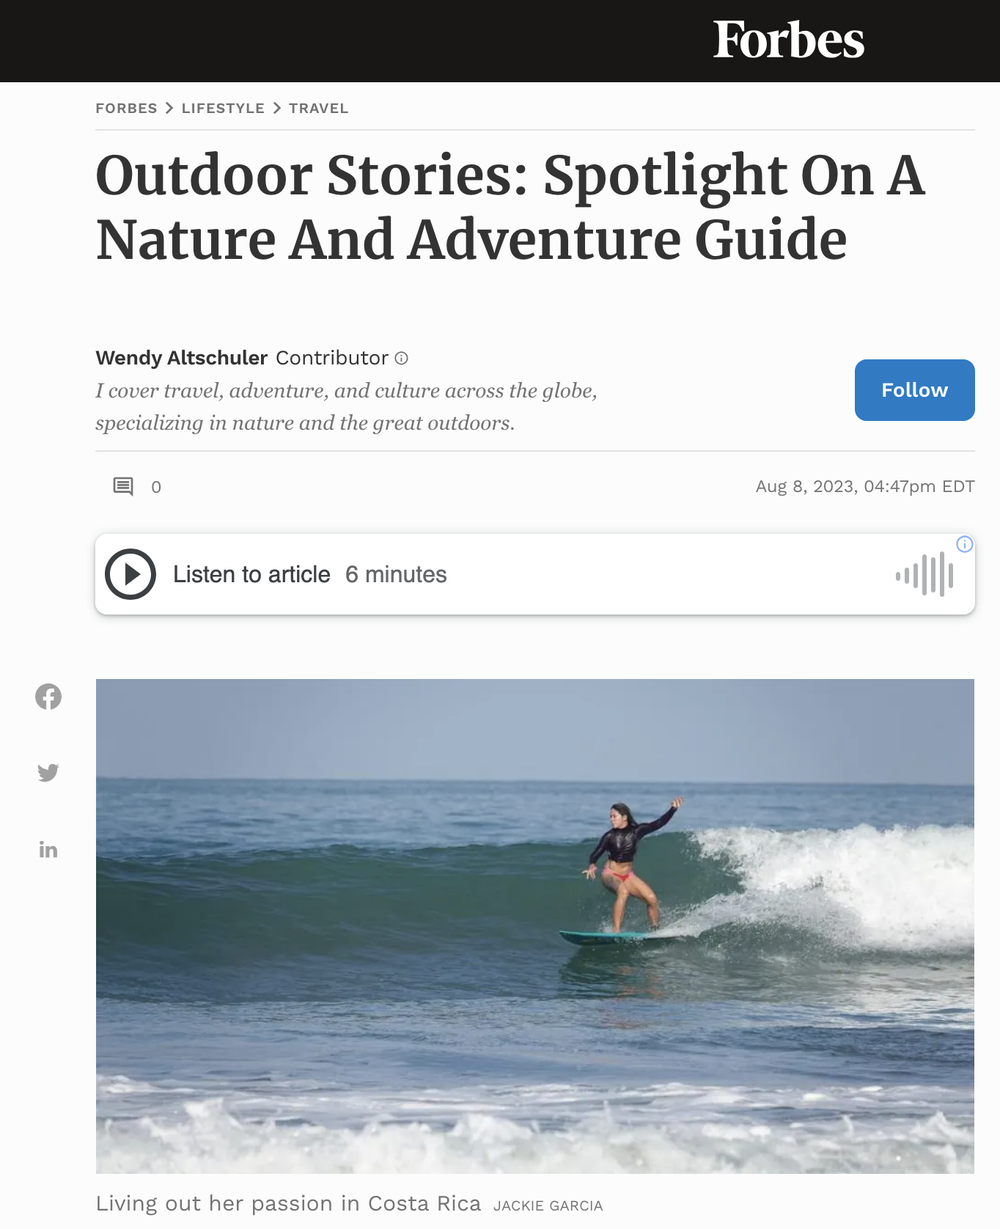 Outdoor Stories: Spotlight On A Nature And Adventure Guide